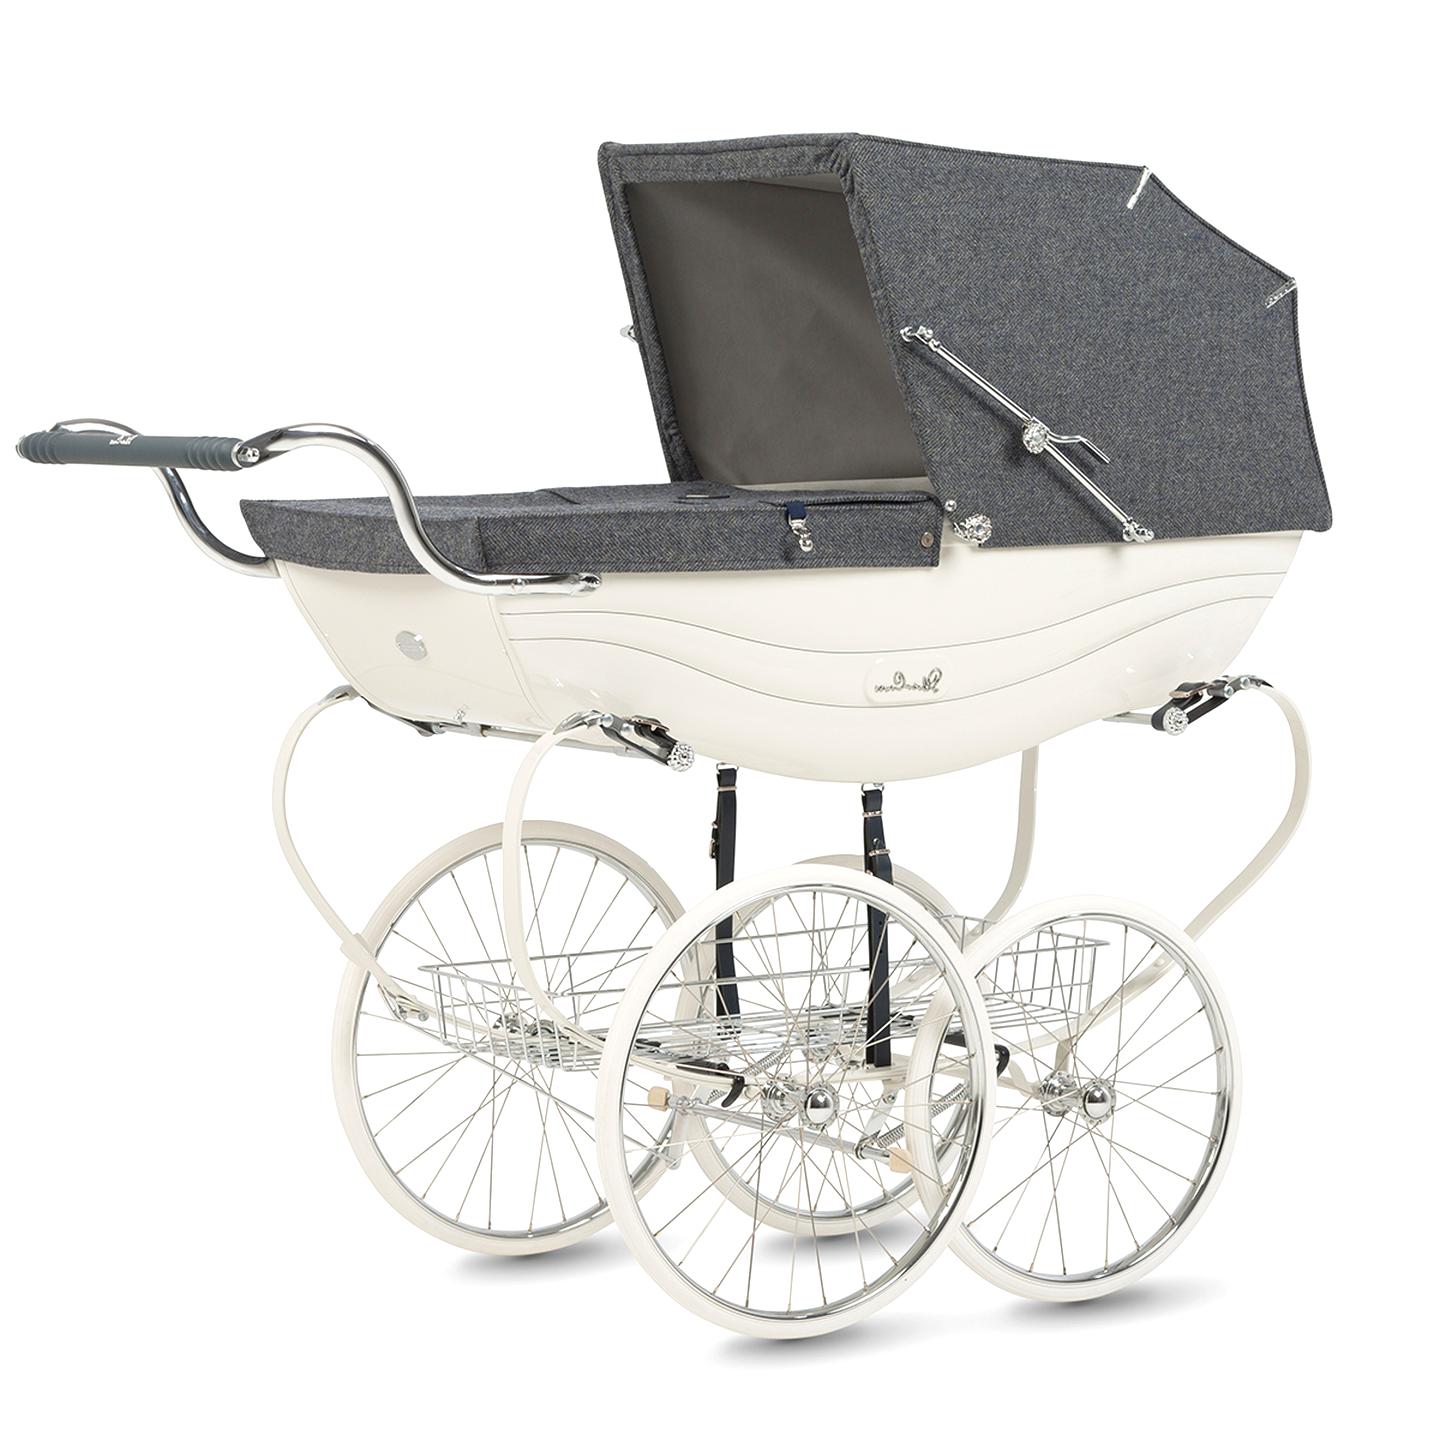 second hand silver cross prams for sale